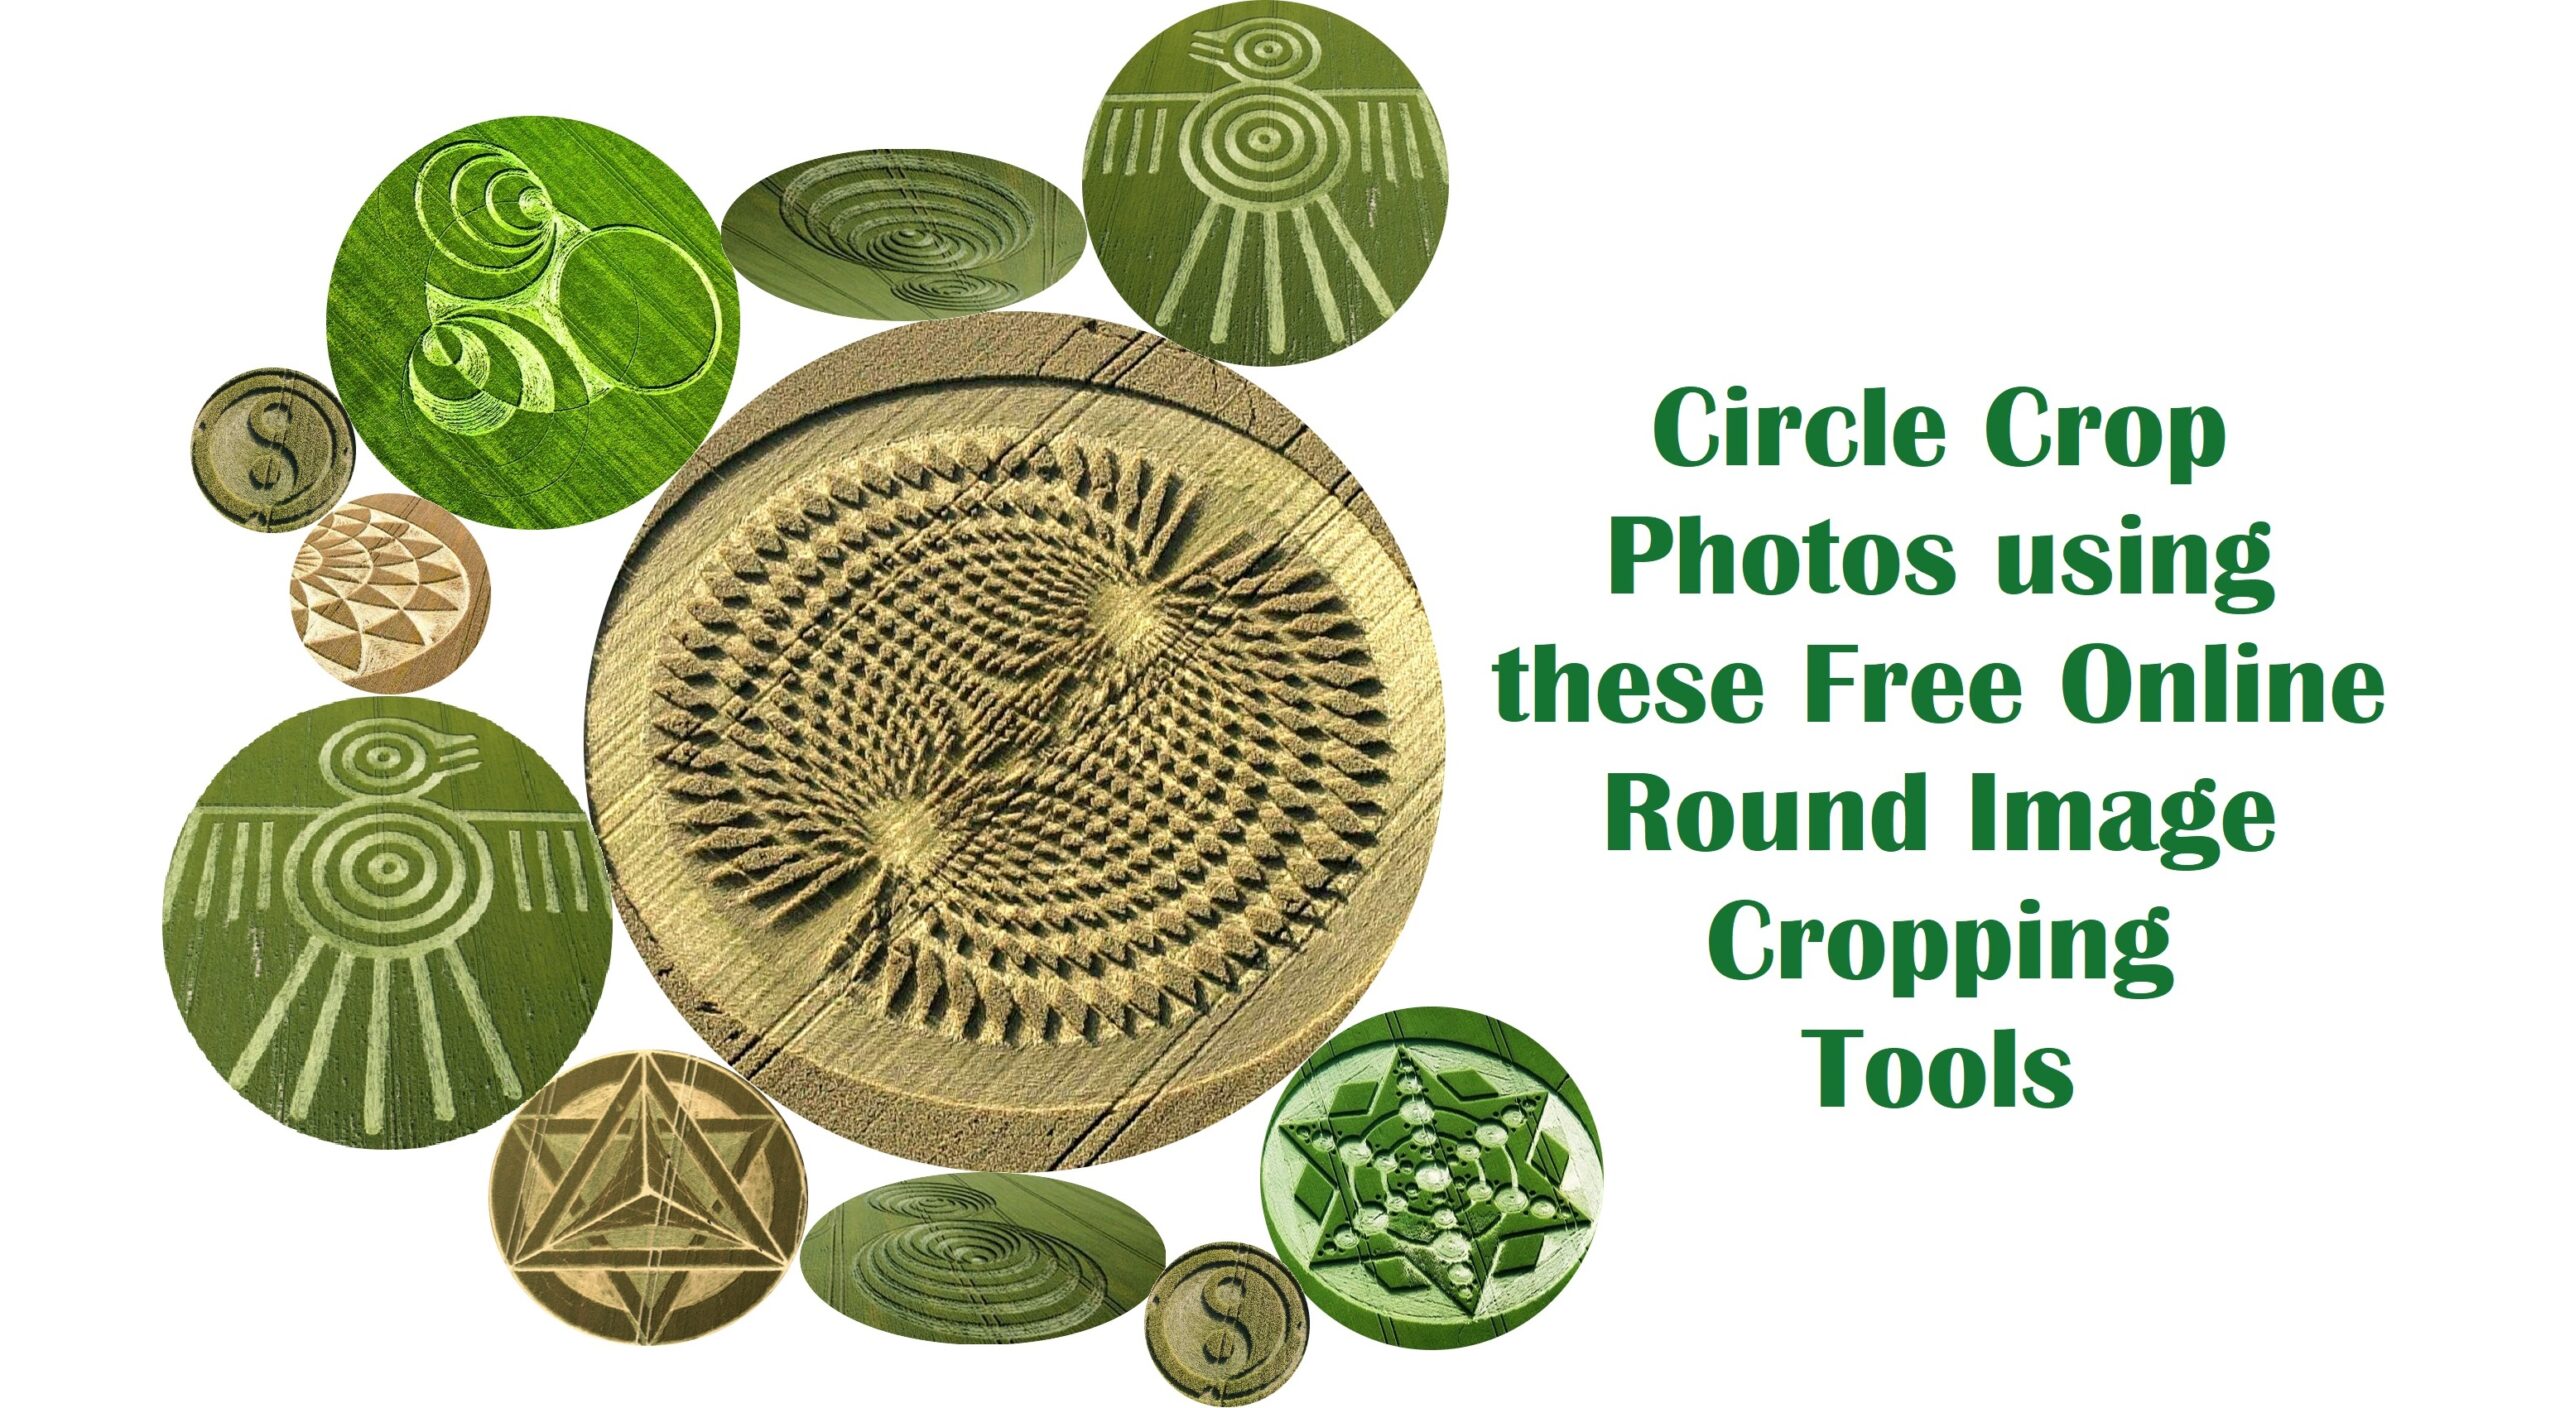 circle crop photos using these free online round image cropping tools